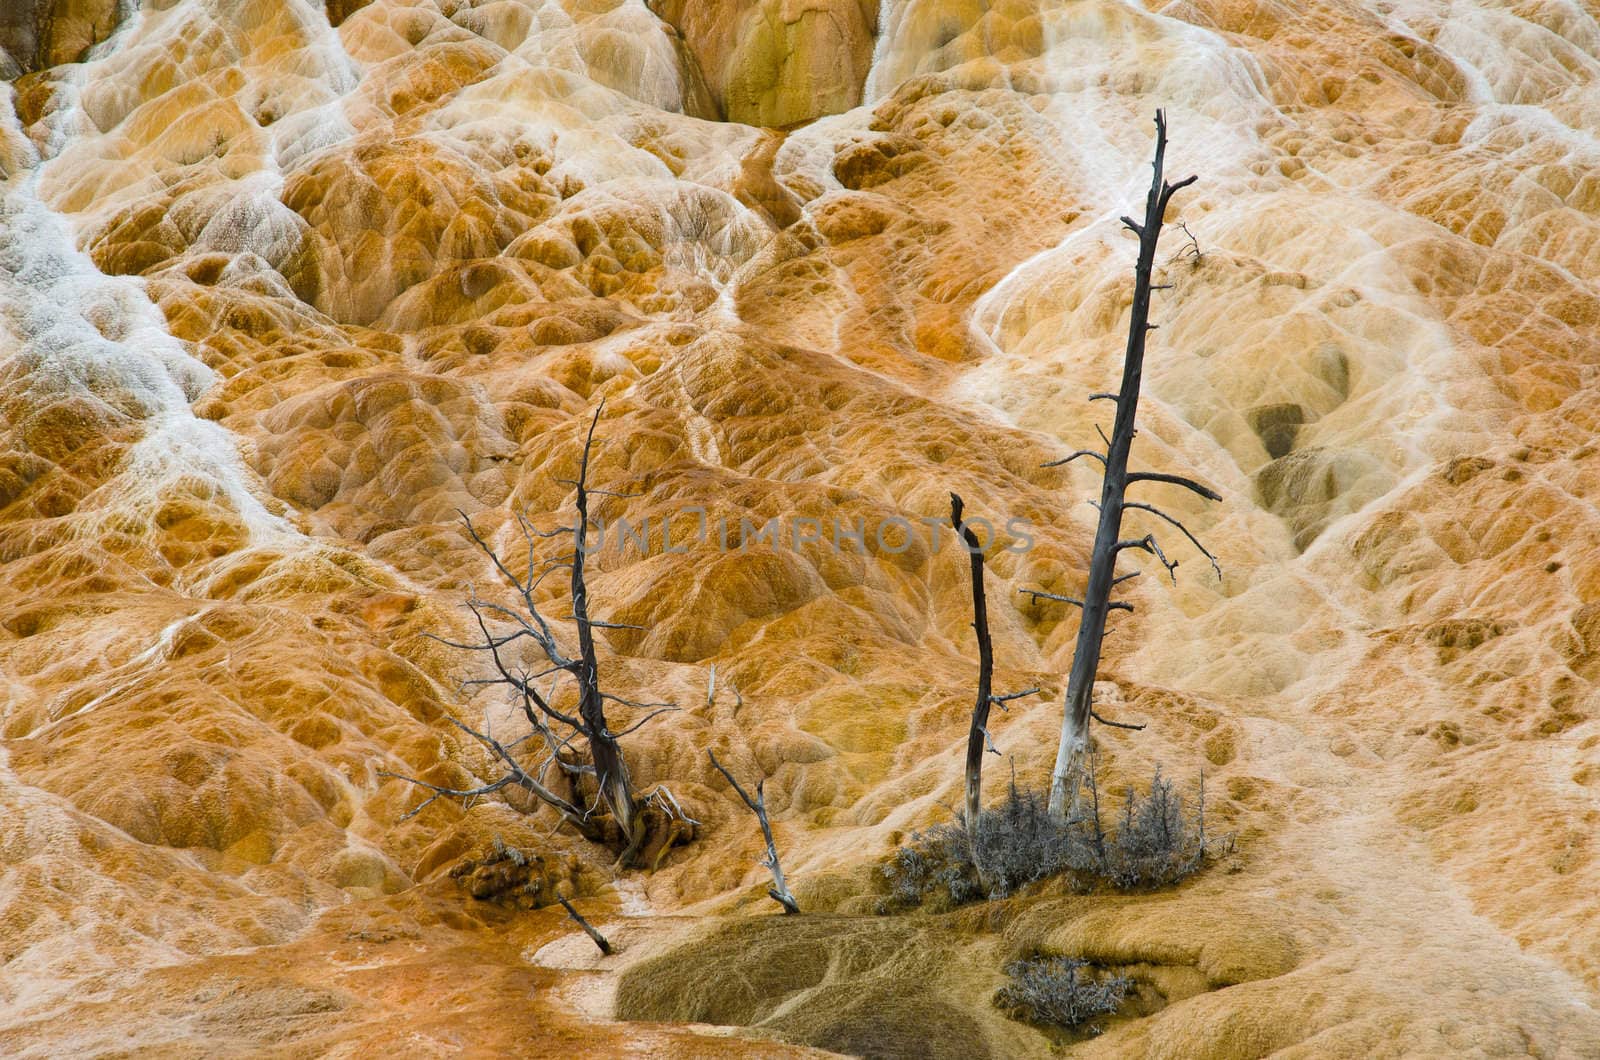 Detail of limestone, dead pine trees and small streams of mineral rich water, Palette Springs, Mammoth Hot Springs, Yellowstone National Park, Park County, Wyoming, USA by CharlesBolin